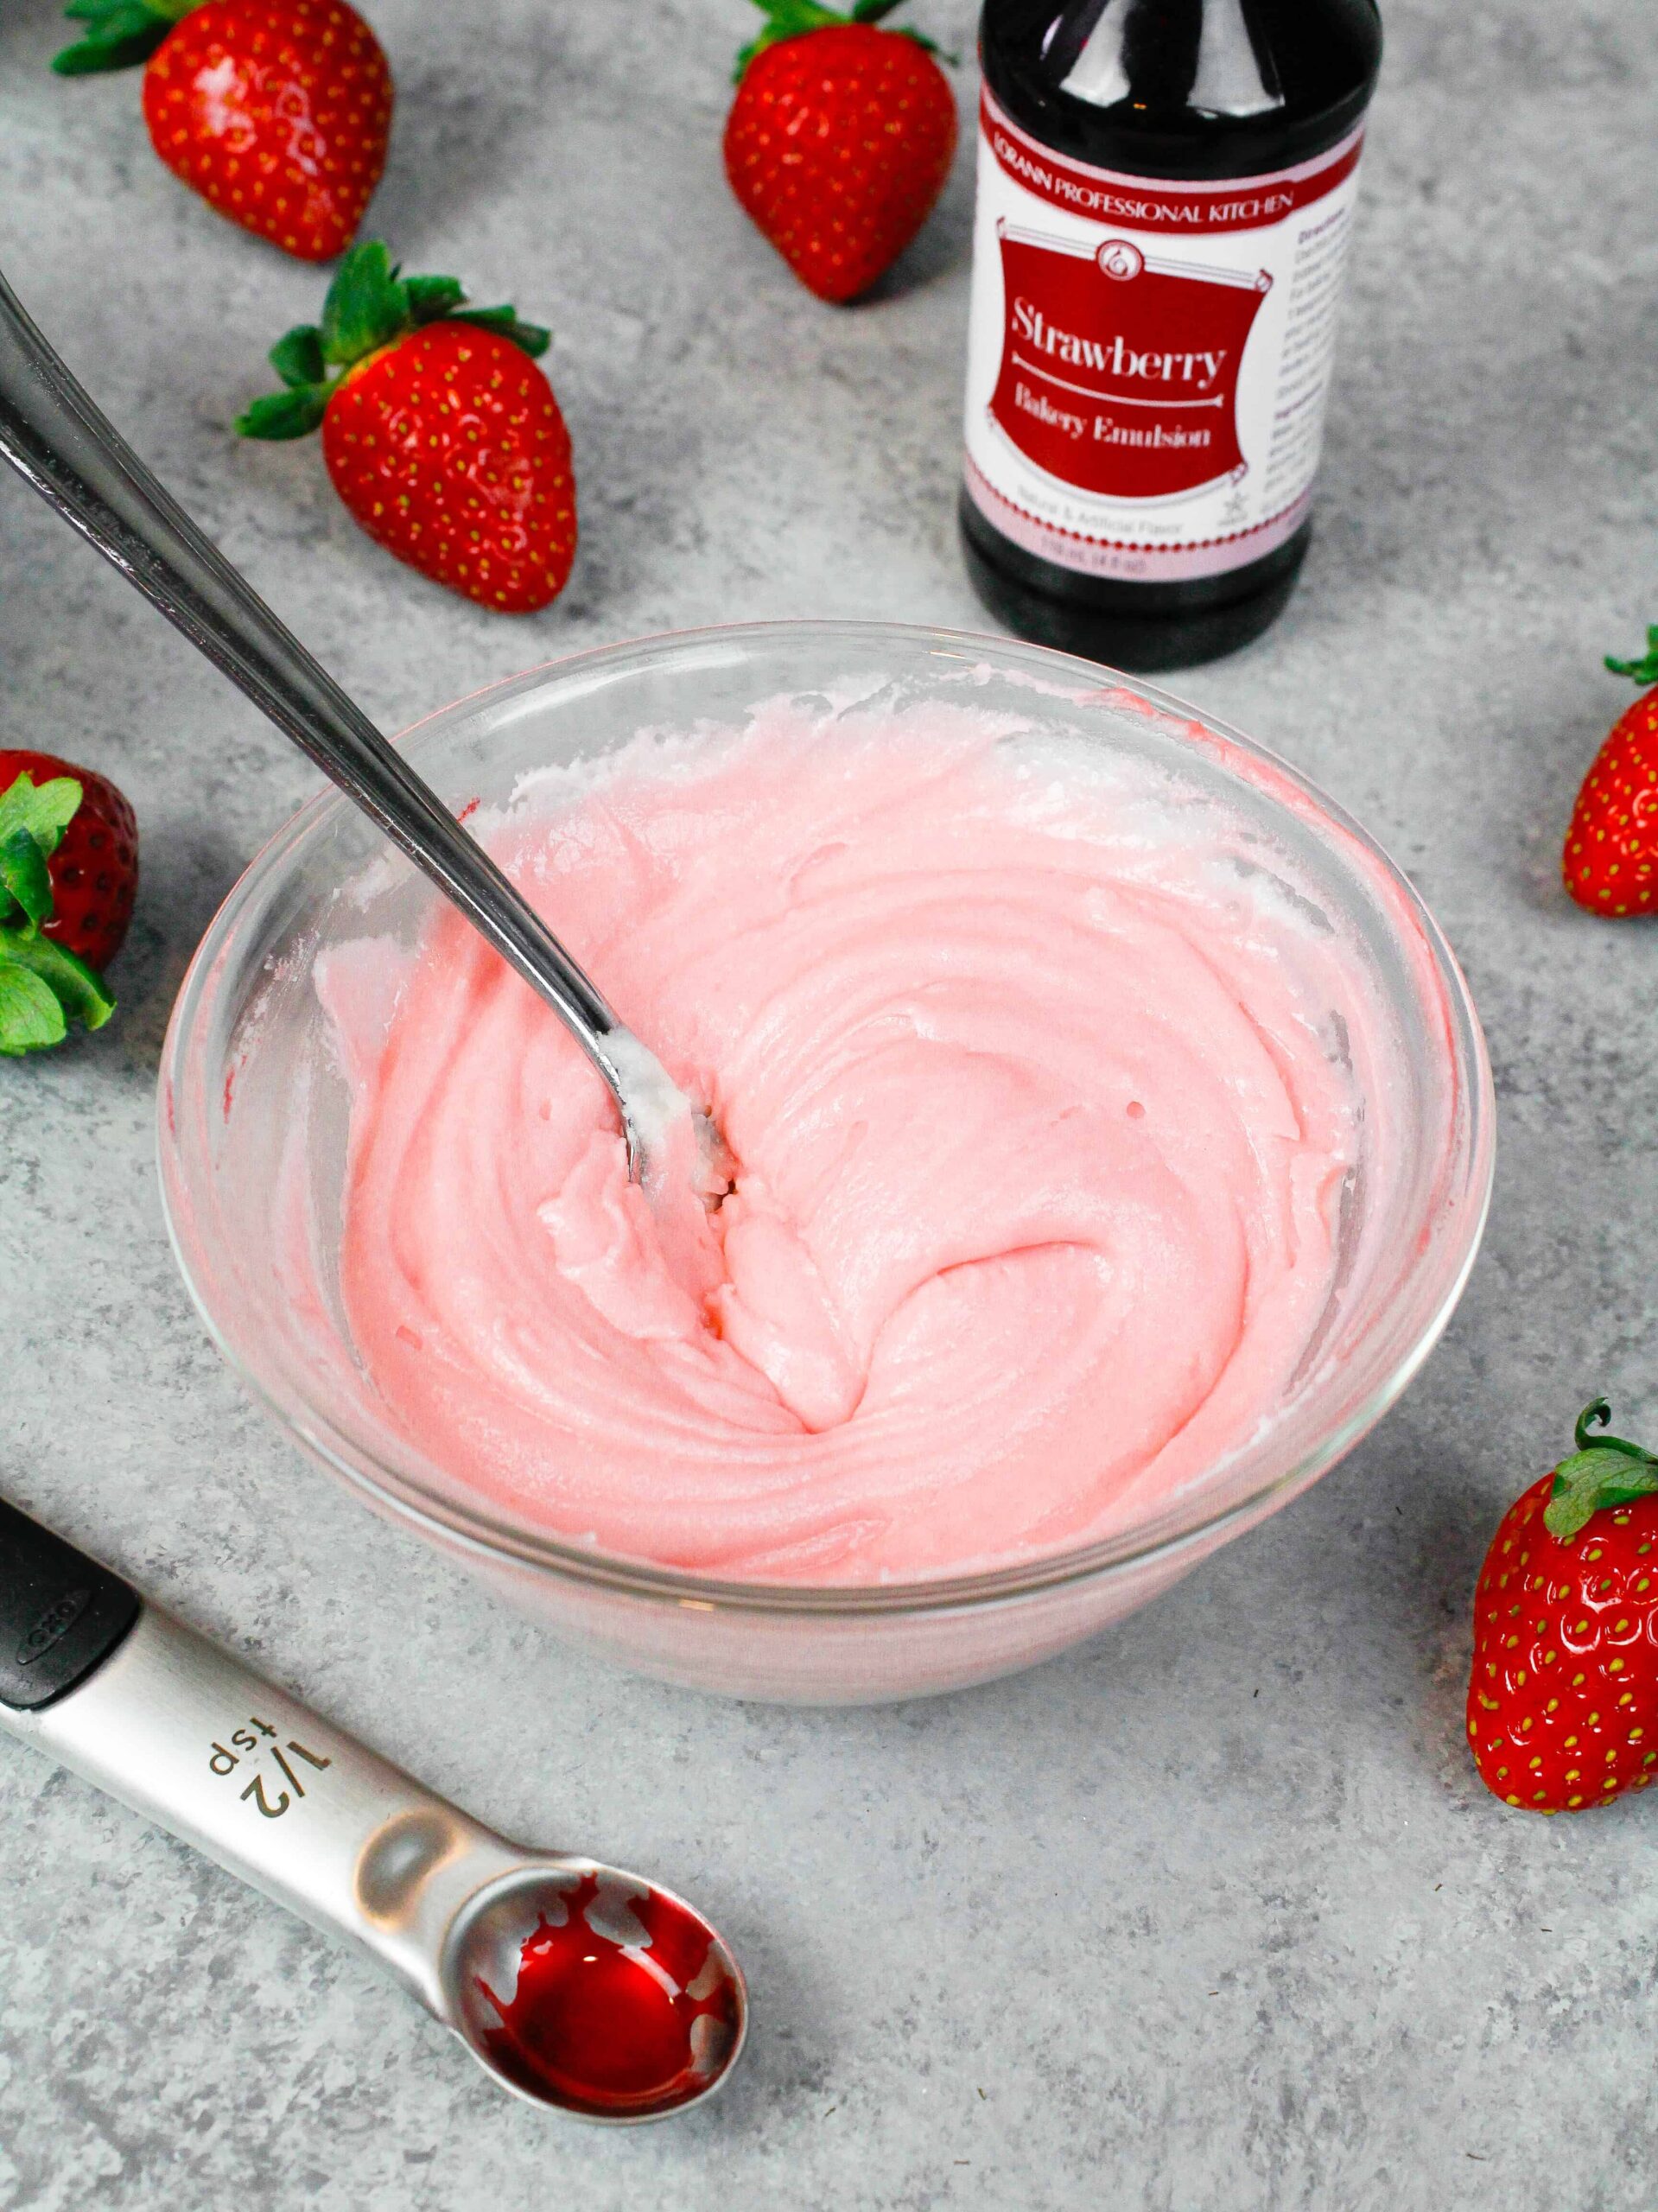 Image of strawberry buttercream frosting made with strawberry emulsion